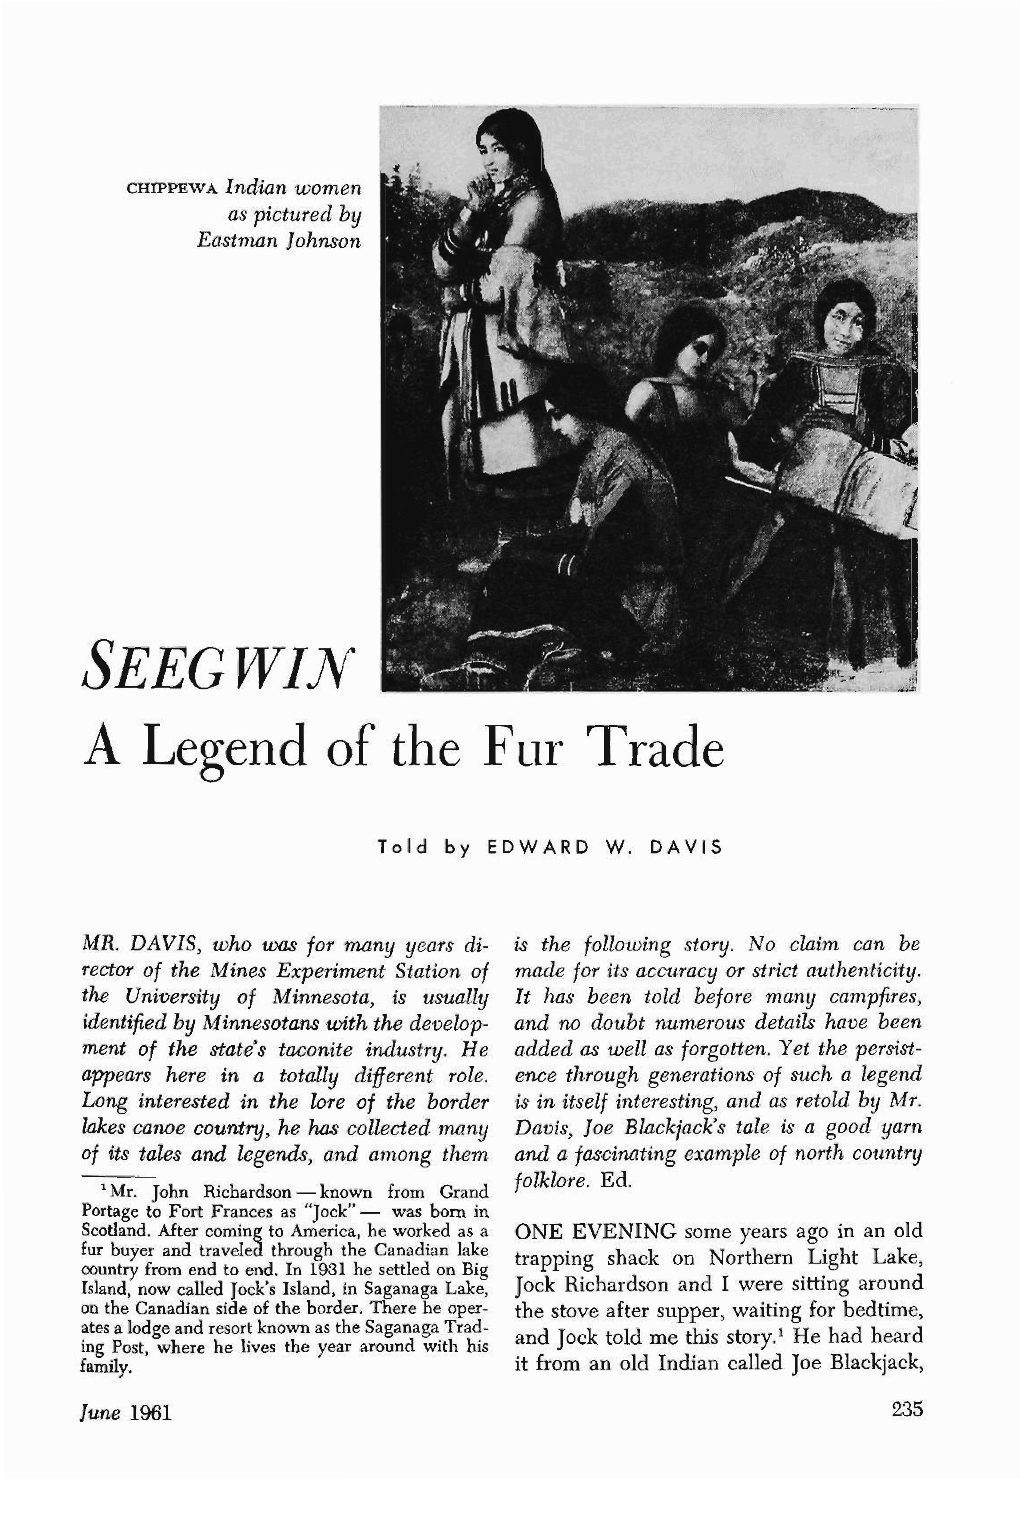 Seegwin, a Legend of the Fur Trade